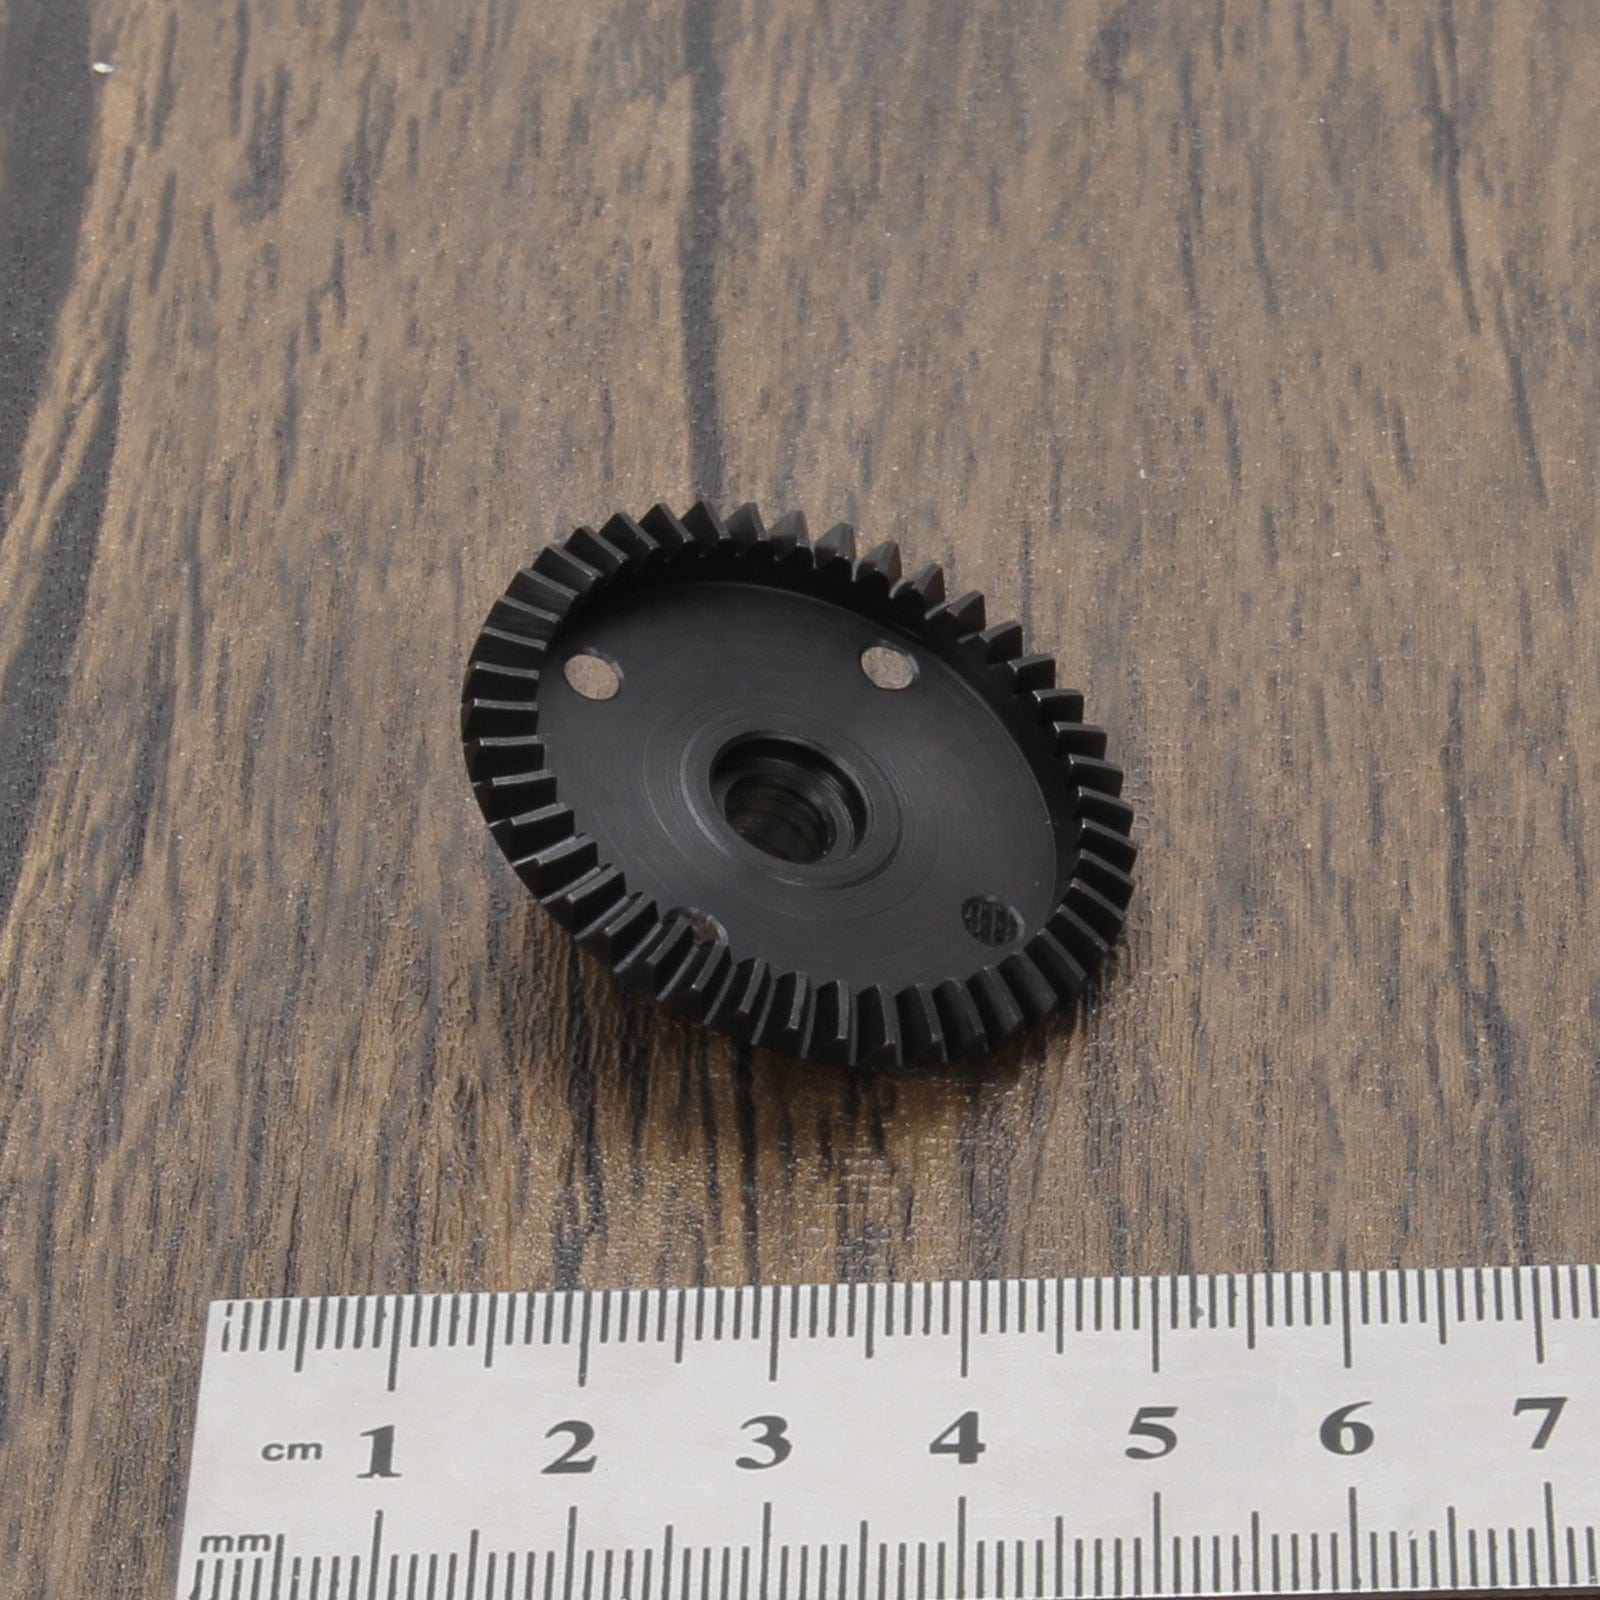 RCAWD Black Super heavy duty 40crmo Front/Rear Differential Ring Gear 43T for 1-8 Losi LMT RC car Upgrded part